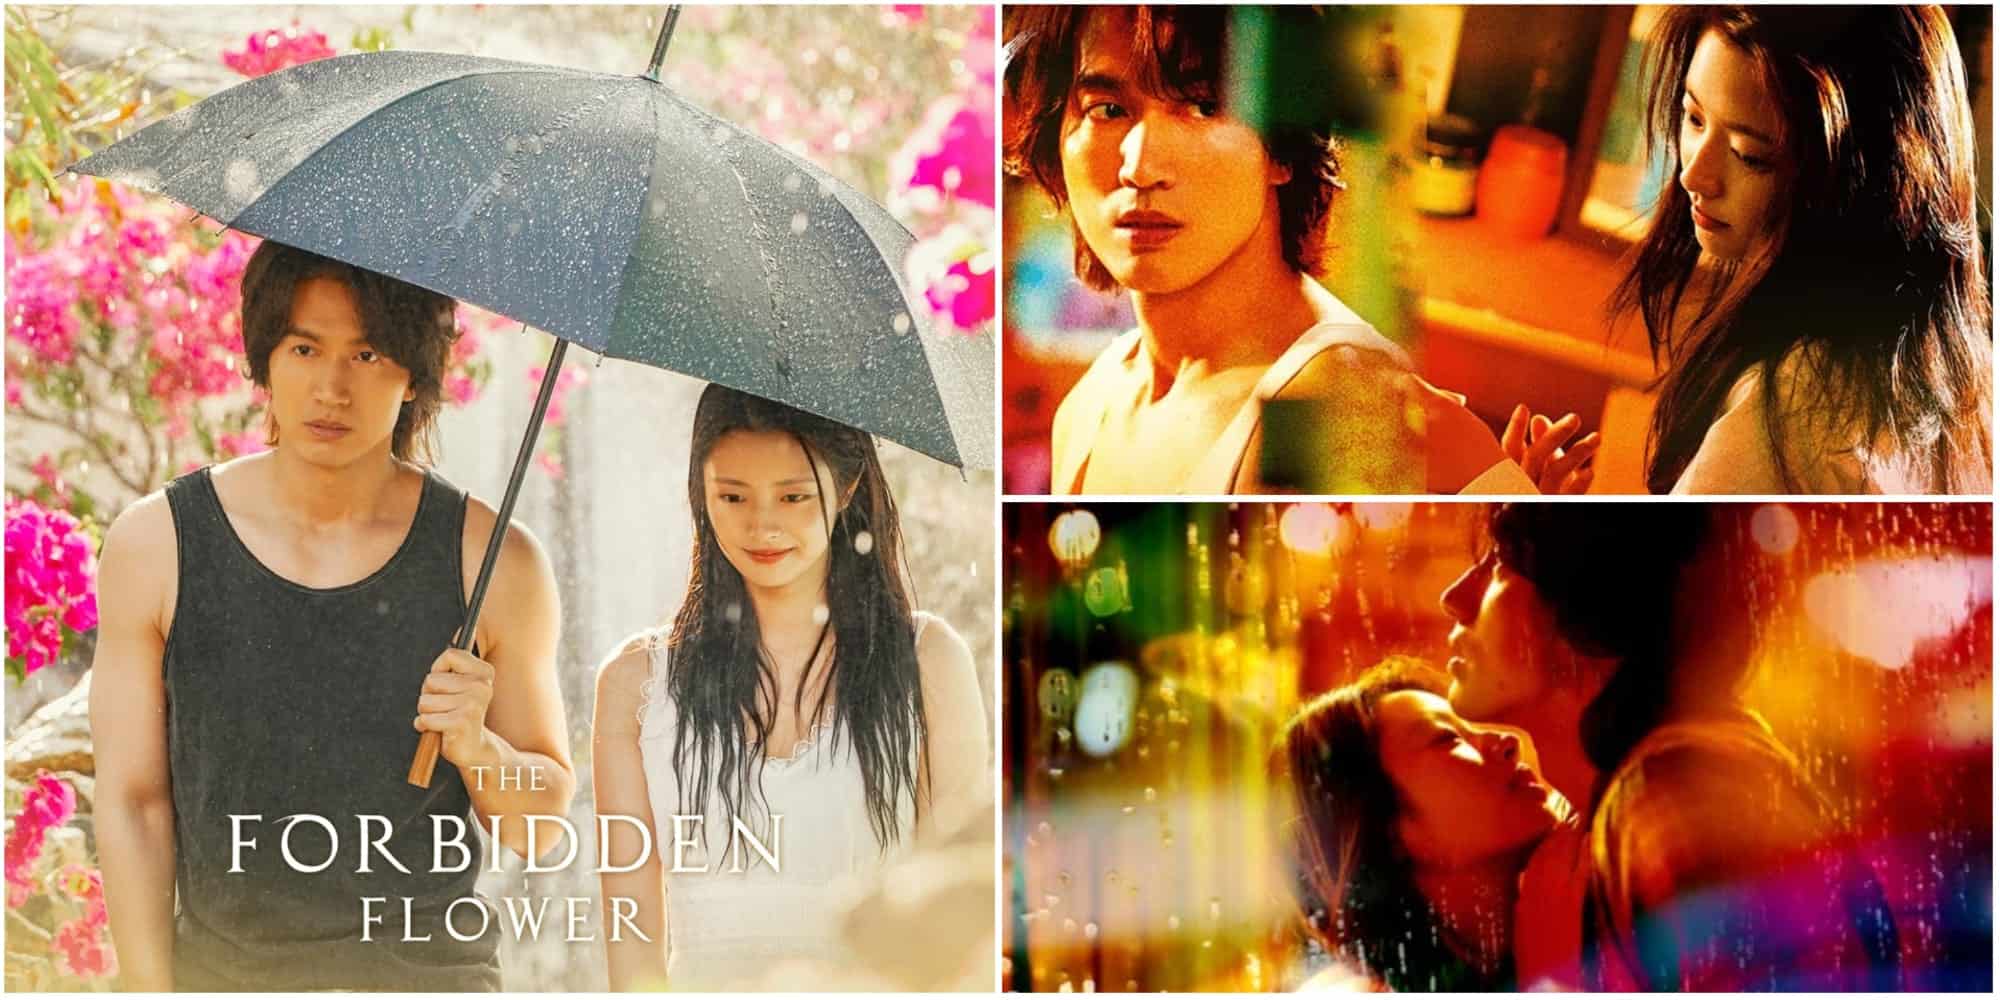 The Forbidden Flower Chinese Romance Drama Streaming Guide